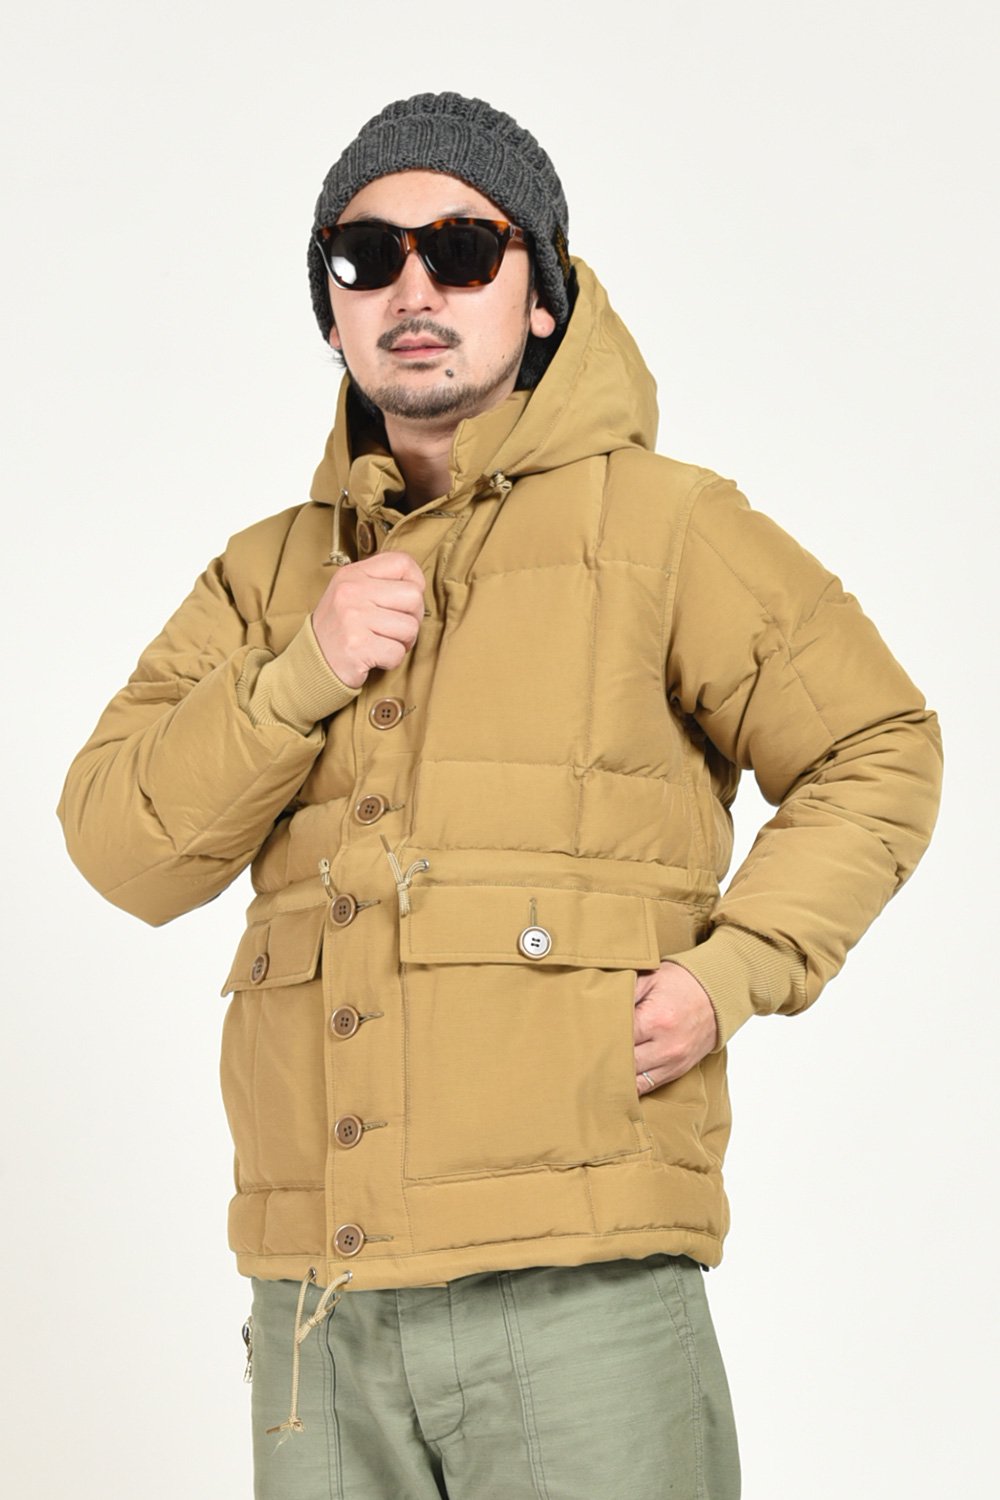 TROPHY CLOTHING(トロフィークロージング) ダウンジャケット ALPINE DOWN JACKET TR19AW-508 通販正規取扱  | ハーレムストア公式通販サイト